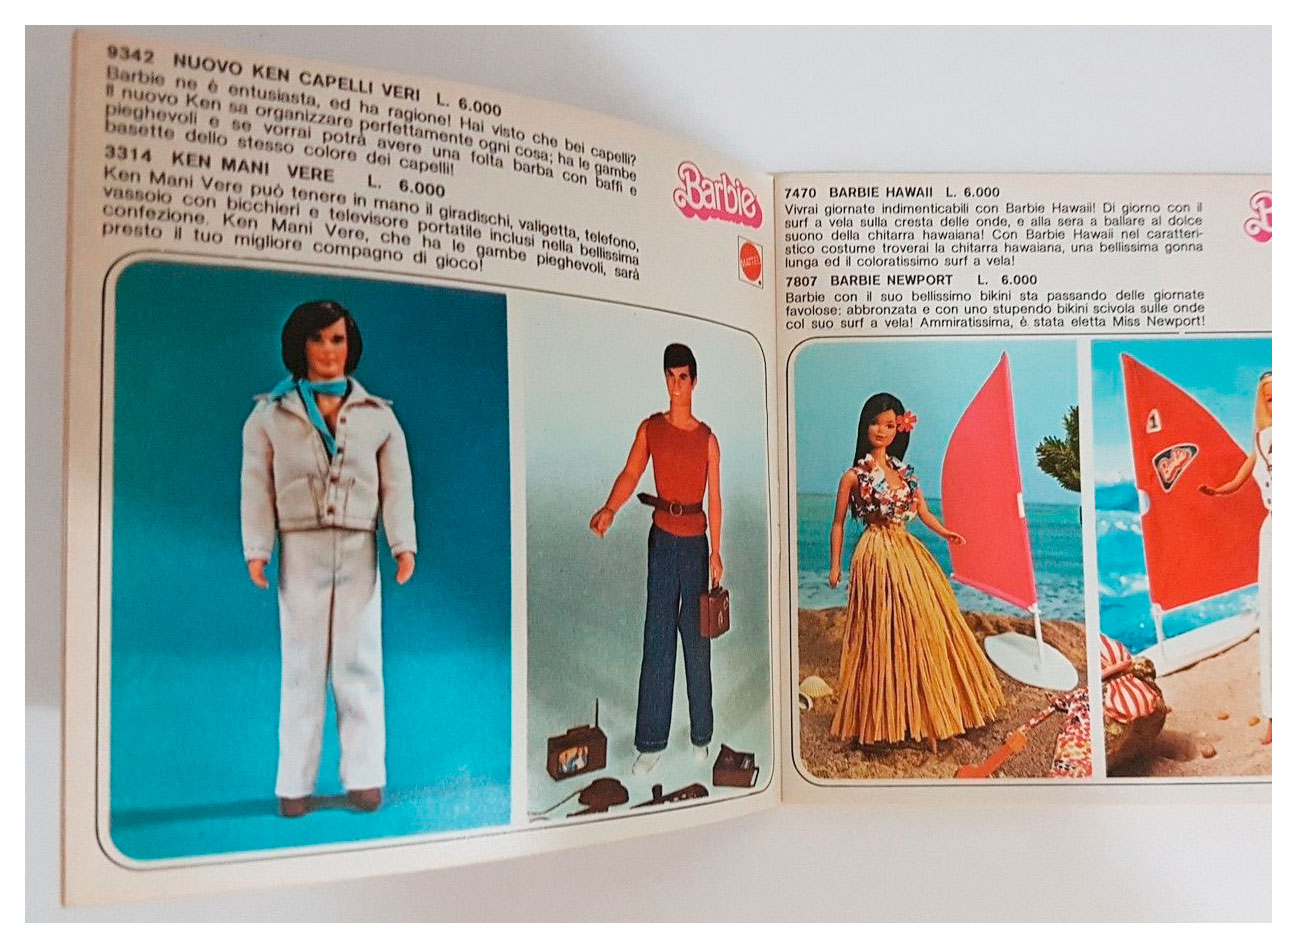 From 1976 Italian Barbie booklet